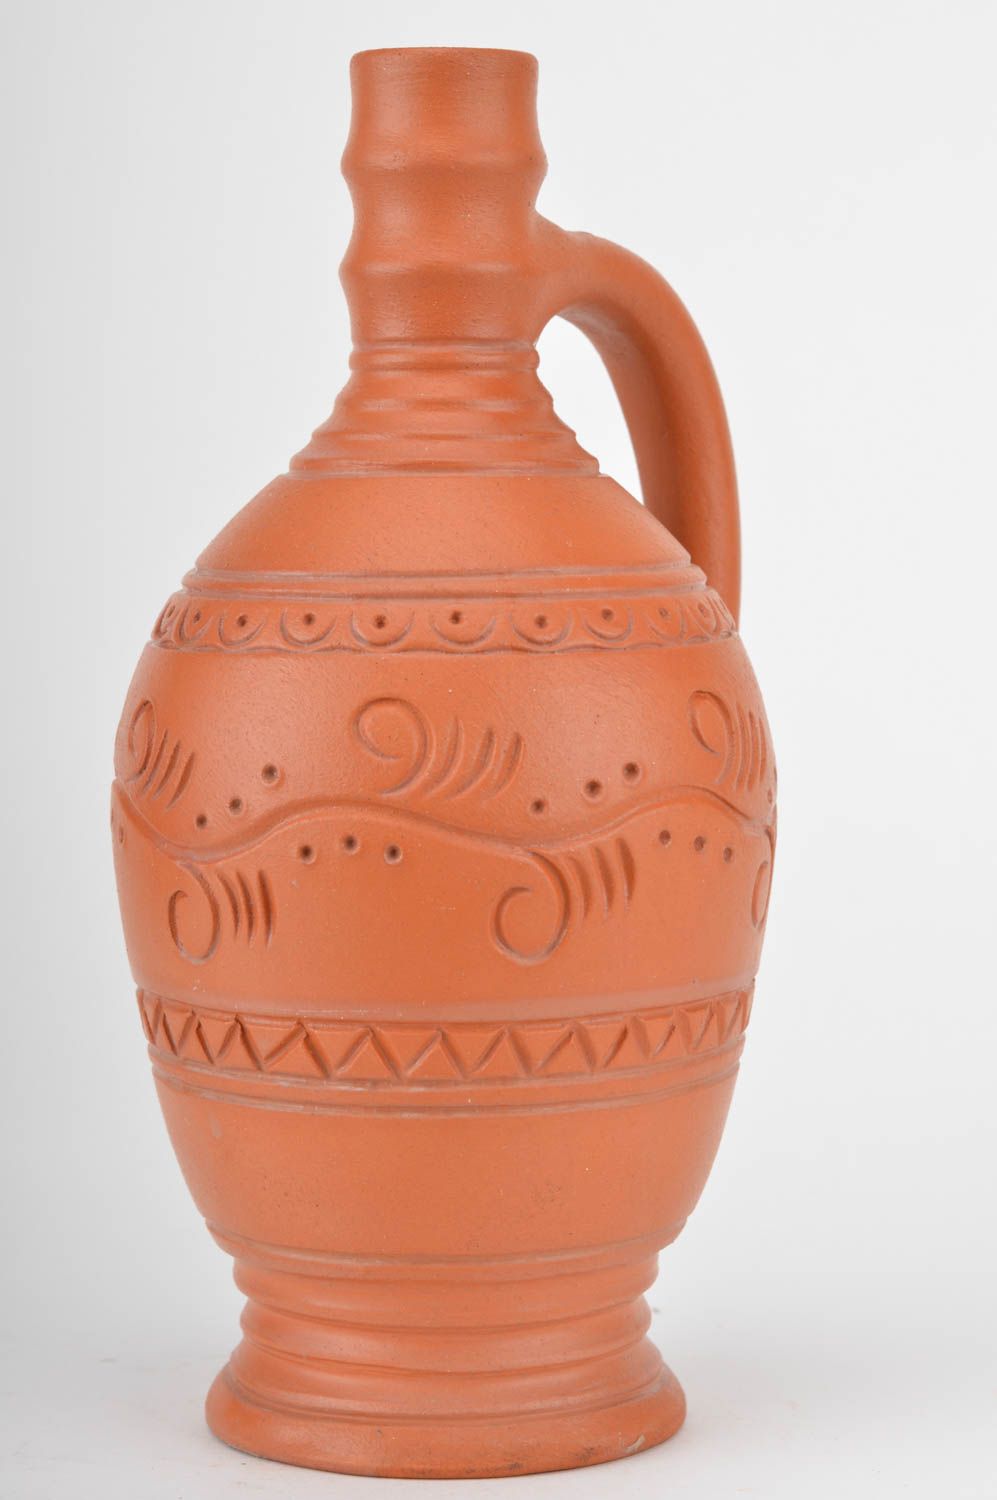 12 oz ceramic bottle shape wine carafe with handle in terracotta style 1,7 lb, 11 inches photo 2